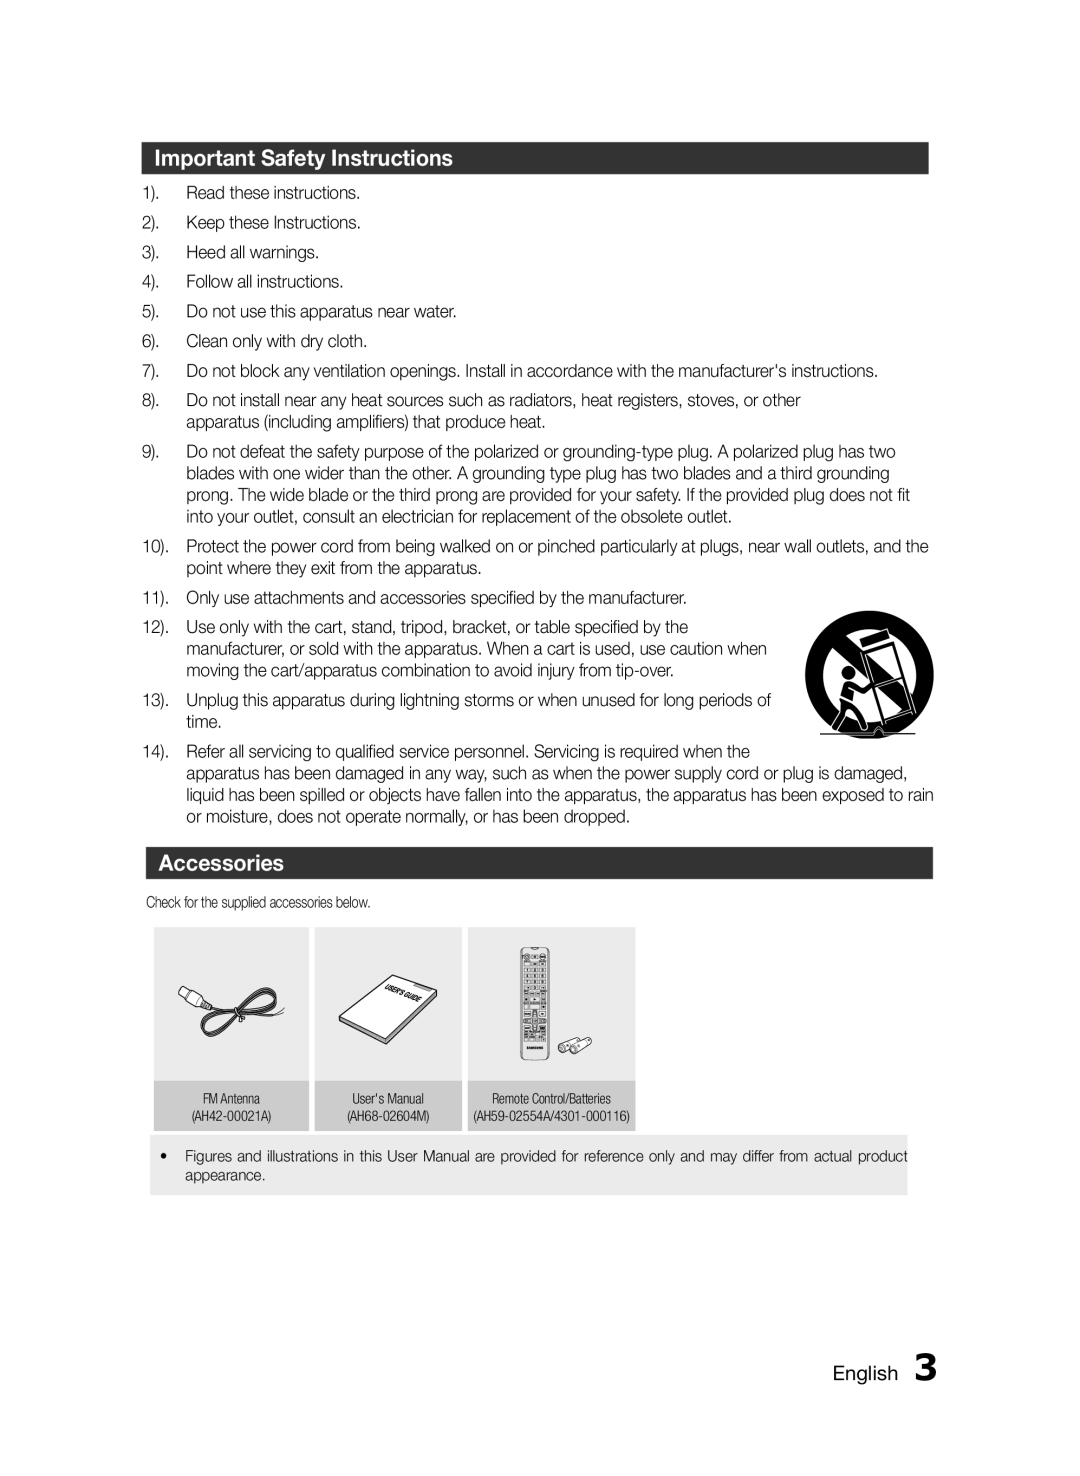 Samsung MXF630BZA user manual Important Safety Instructions, Accessories, English 